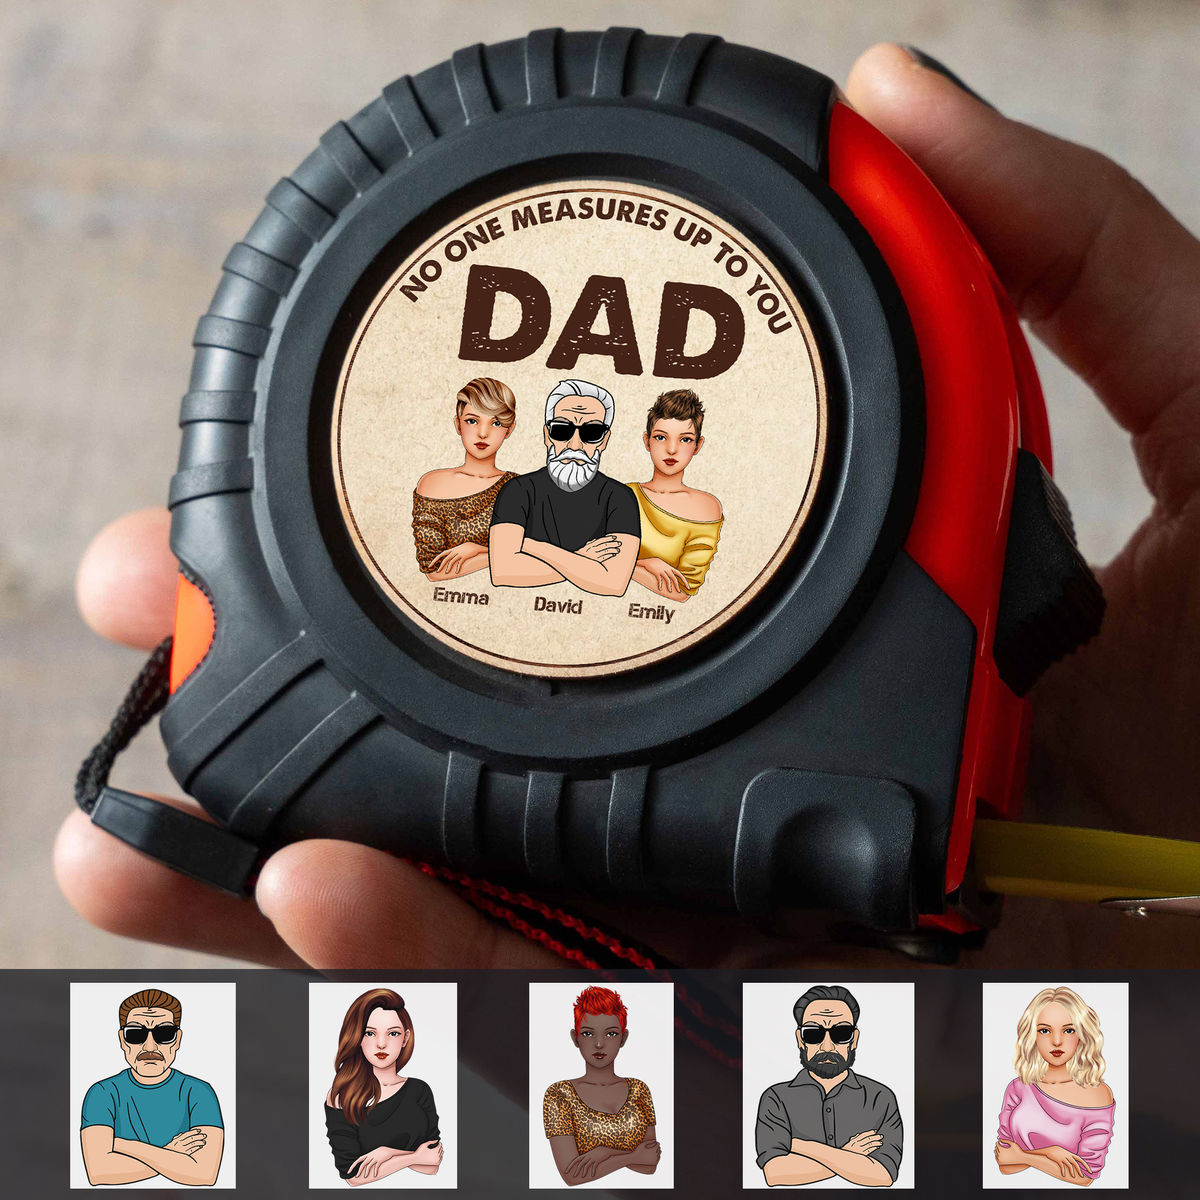 Personalized Tape Measure, Personalized Gift for Father's Day